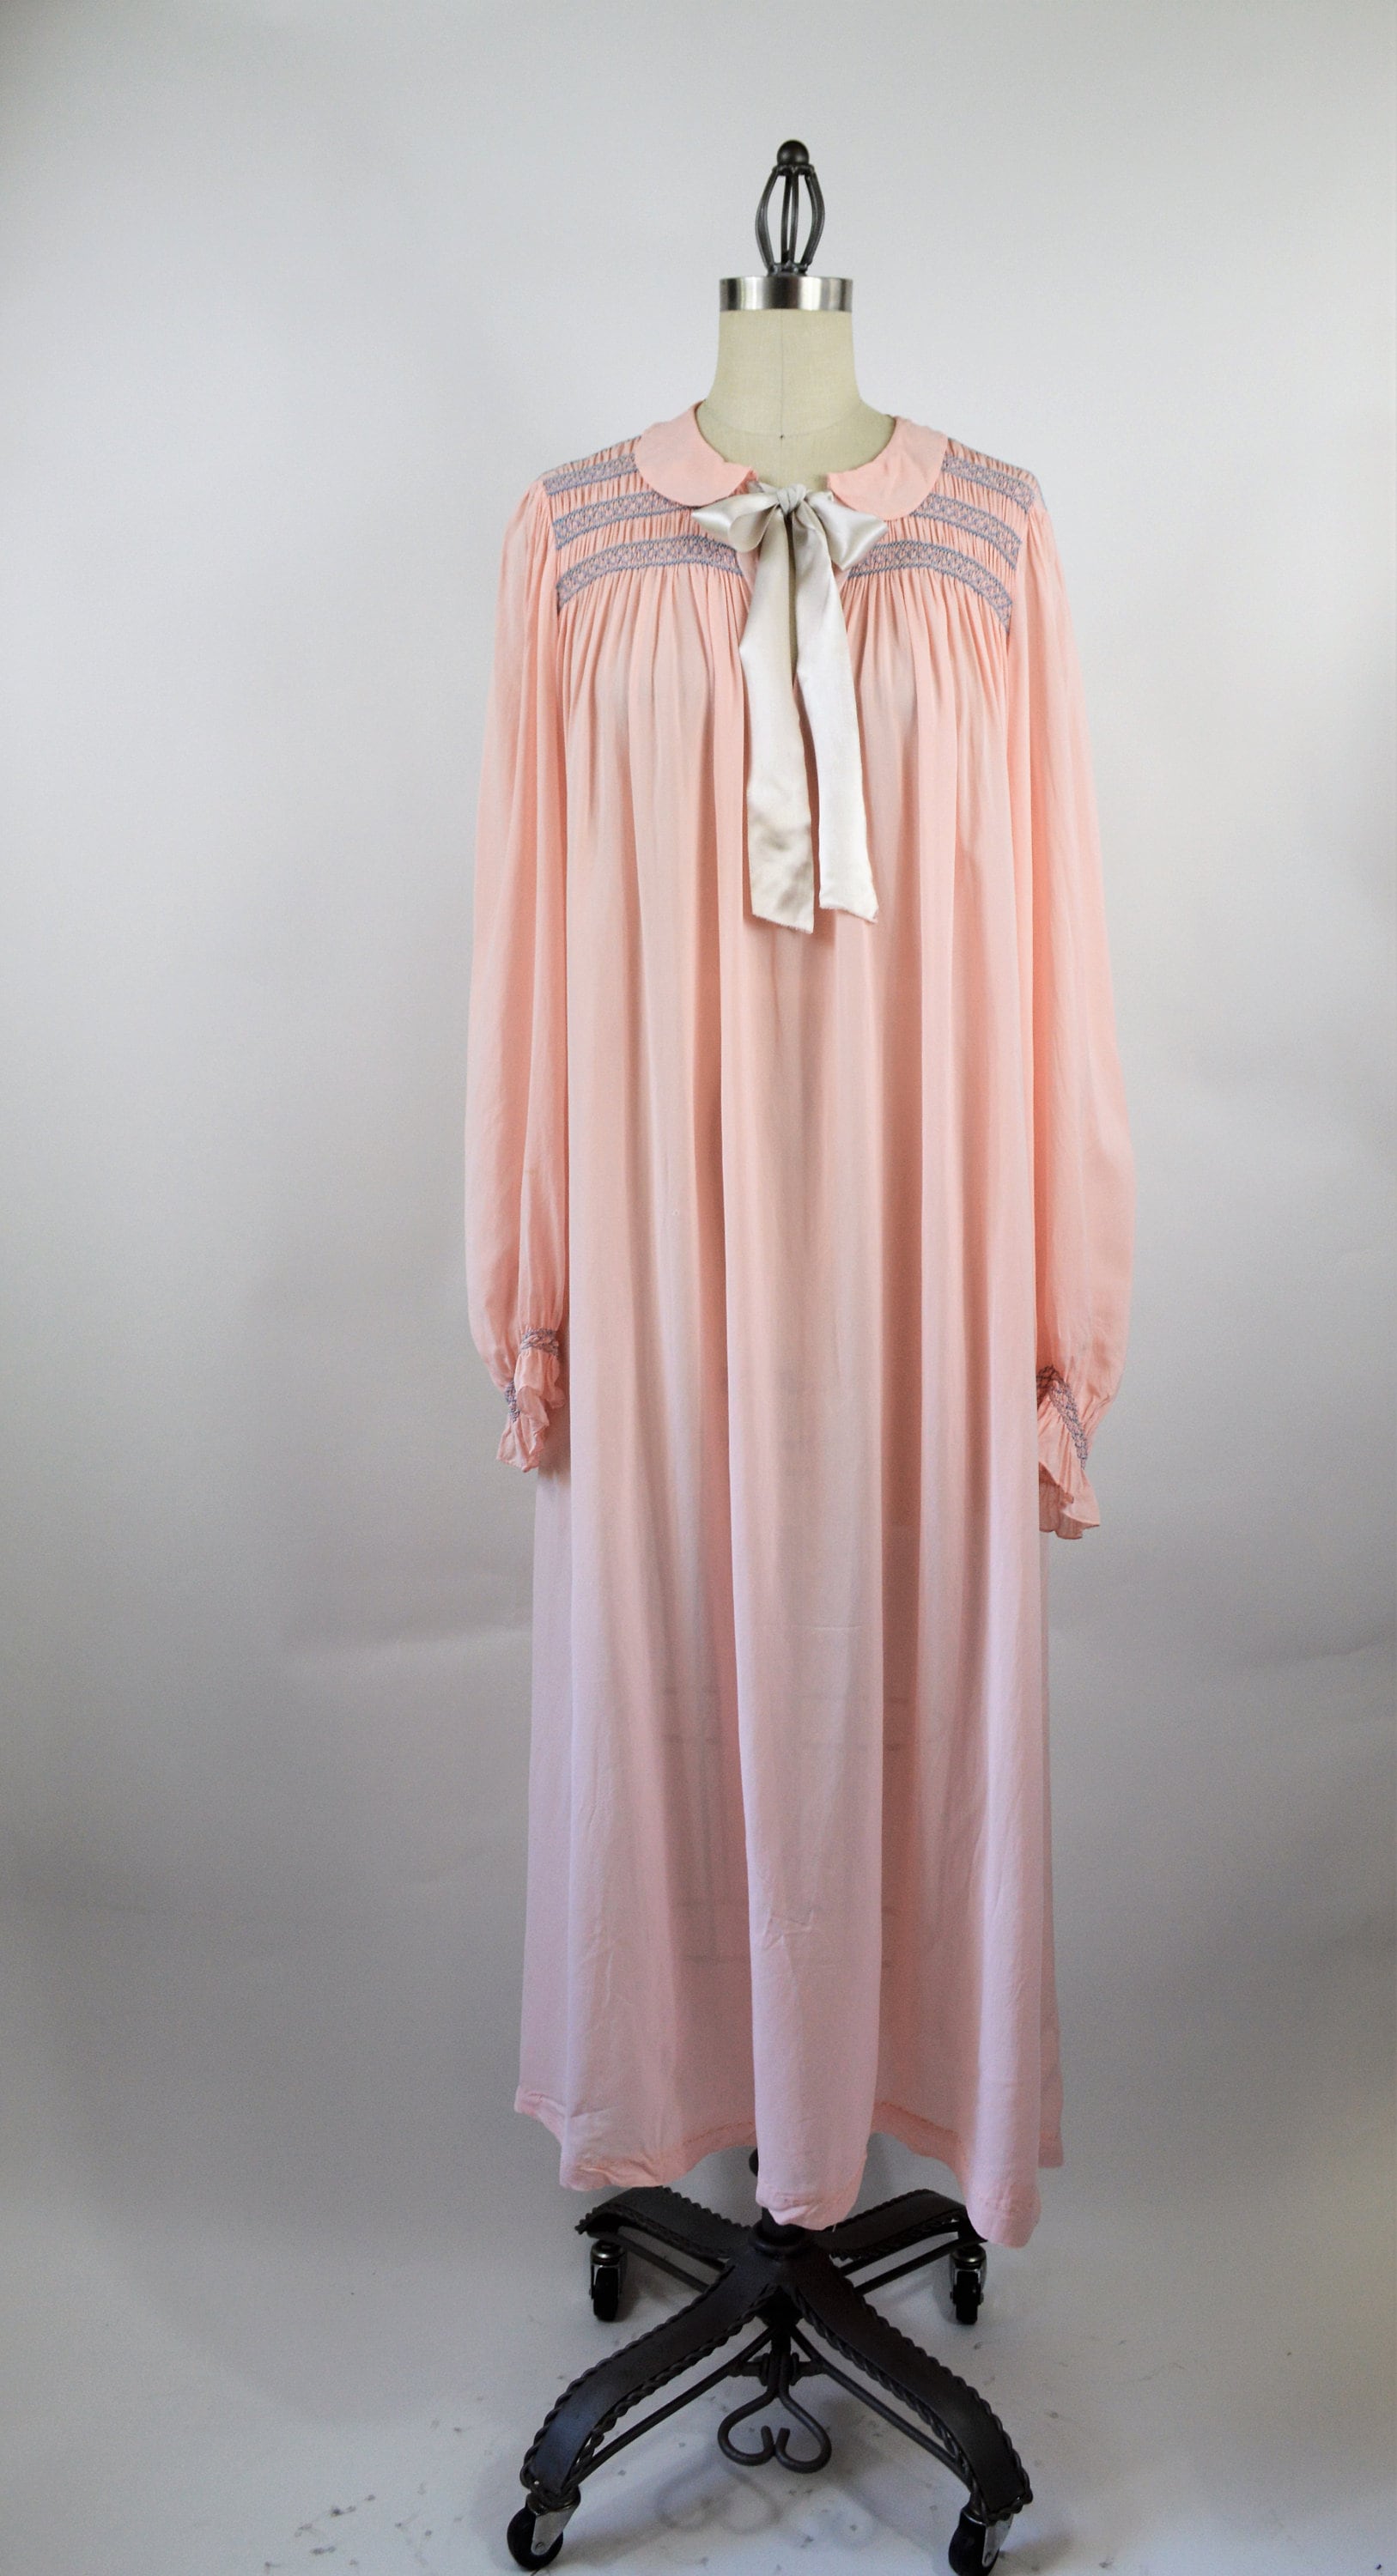 RARE 1940s Nightgown by Thea Tewi Original Pale Pink Rayon | Etsy